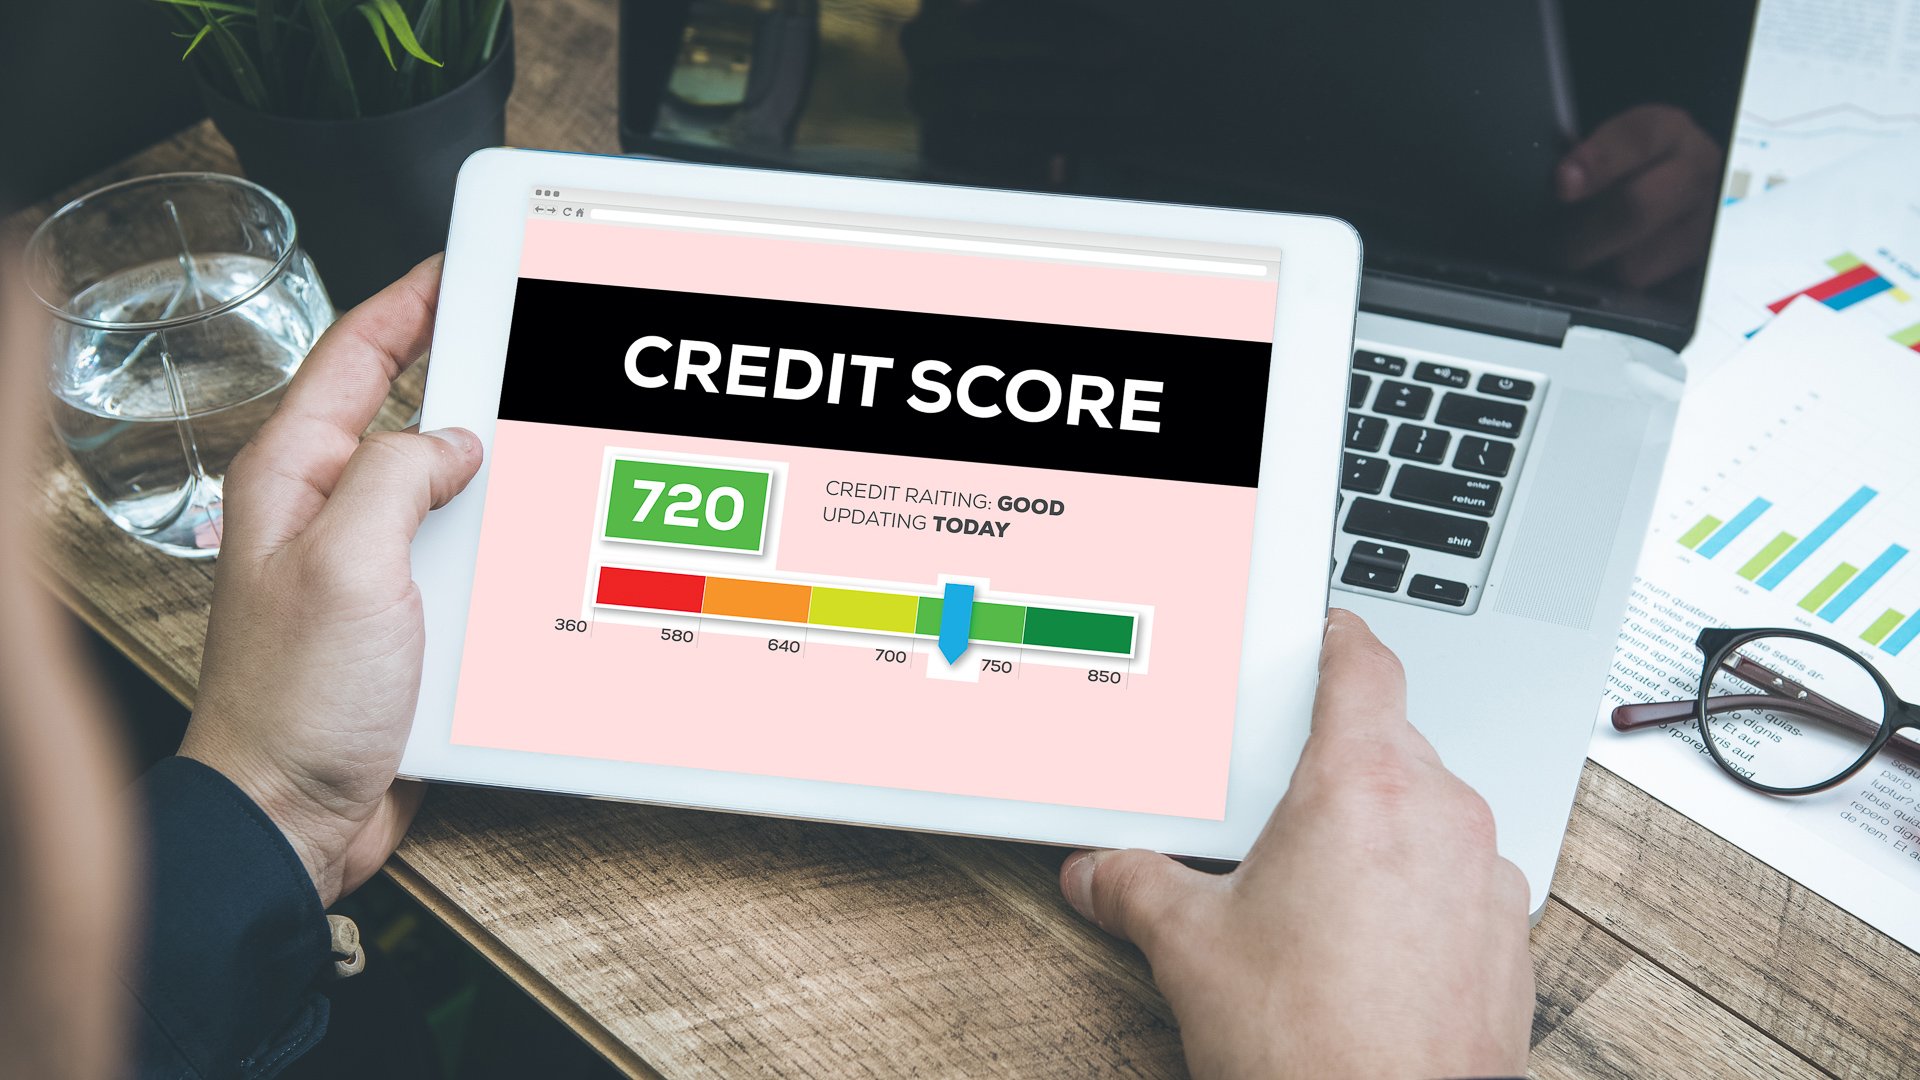 How Does Being an Authorized User Affect My Credit Score?